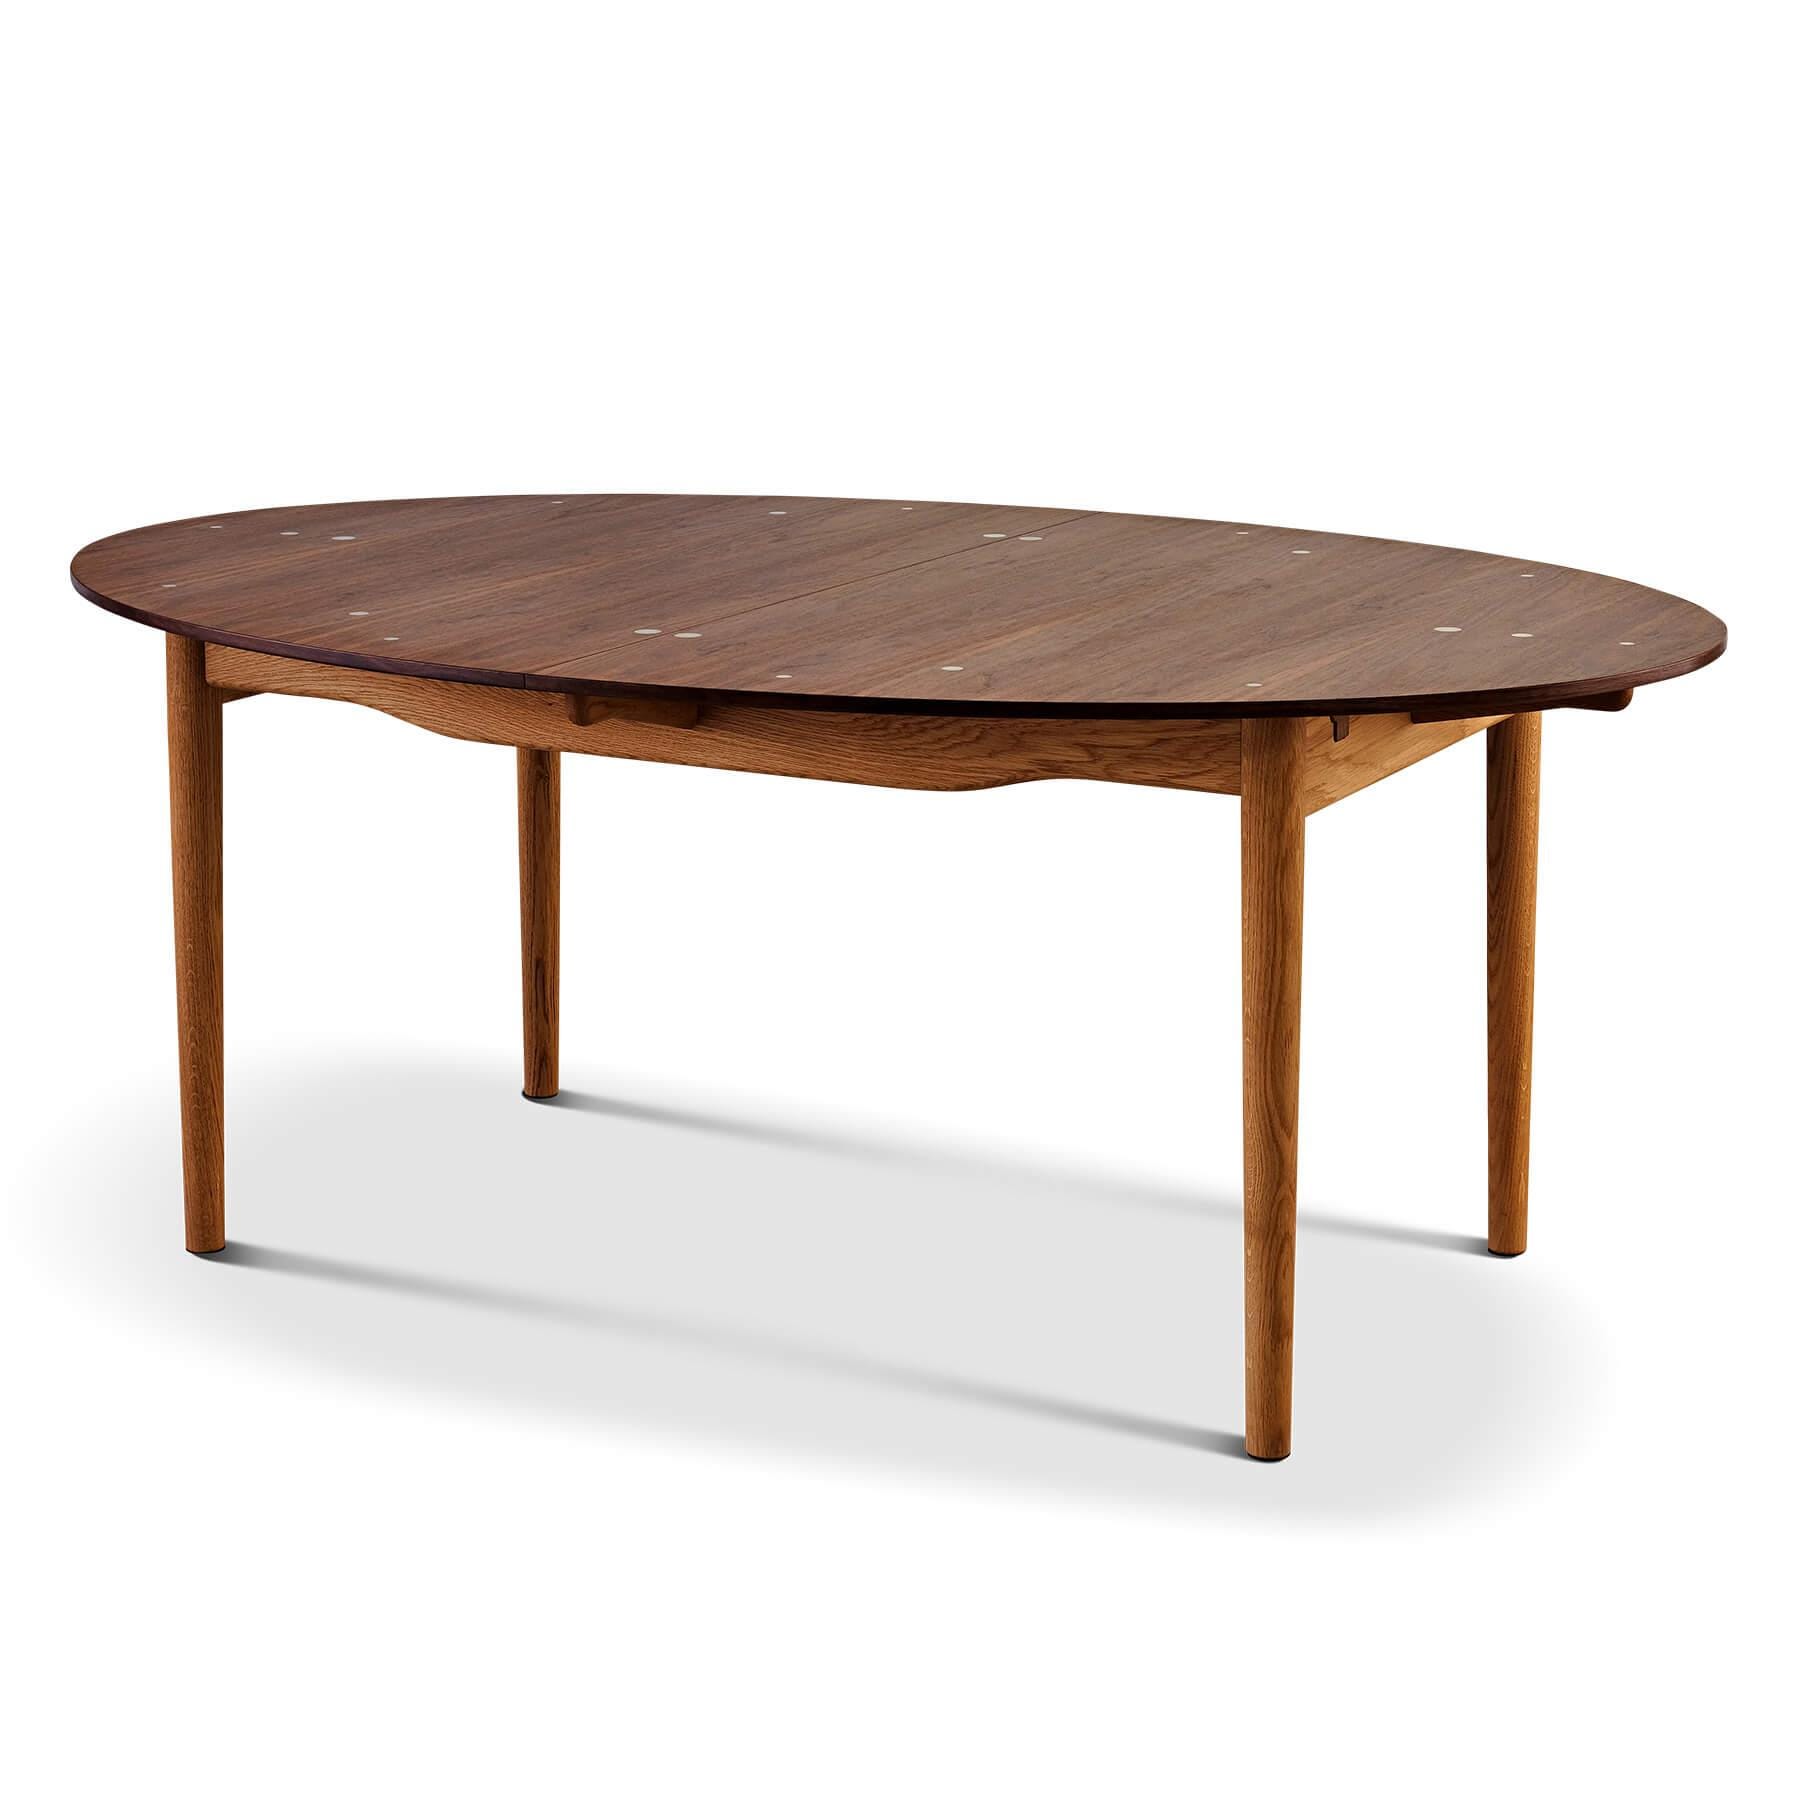 Outlet Finn Juhl Small Silver Dining Table Walnut Including M25 Delivery Designer Furniture From Holloways Of Ludlow